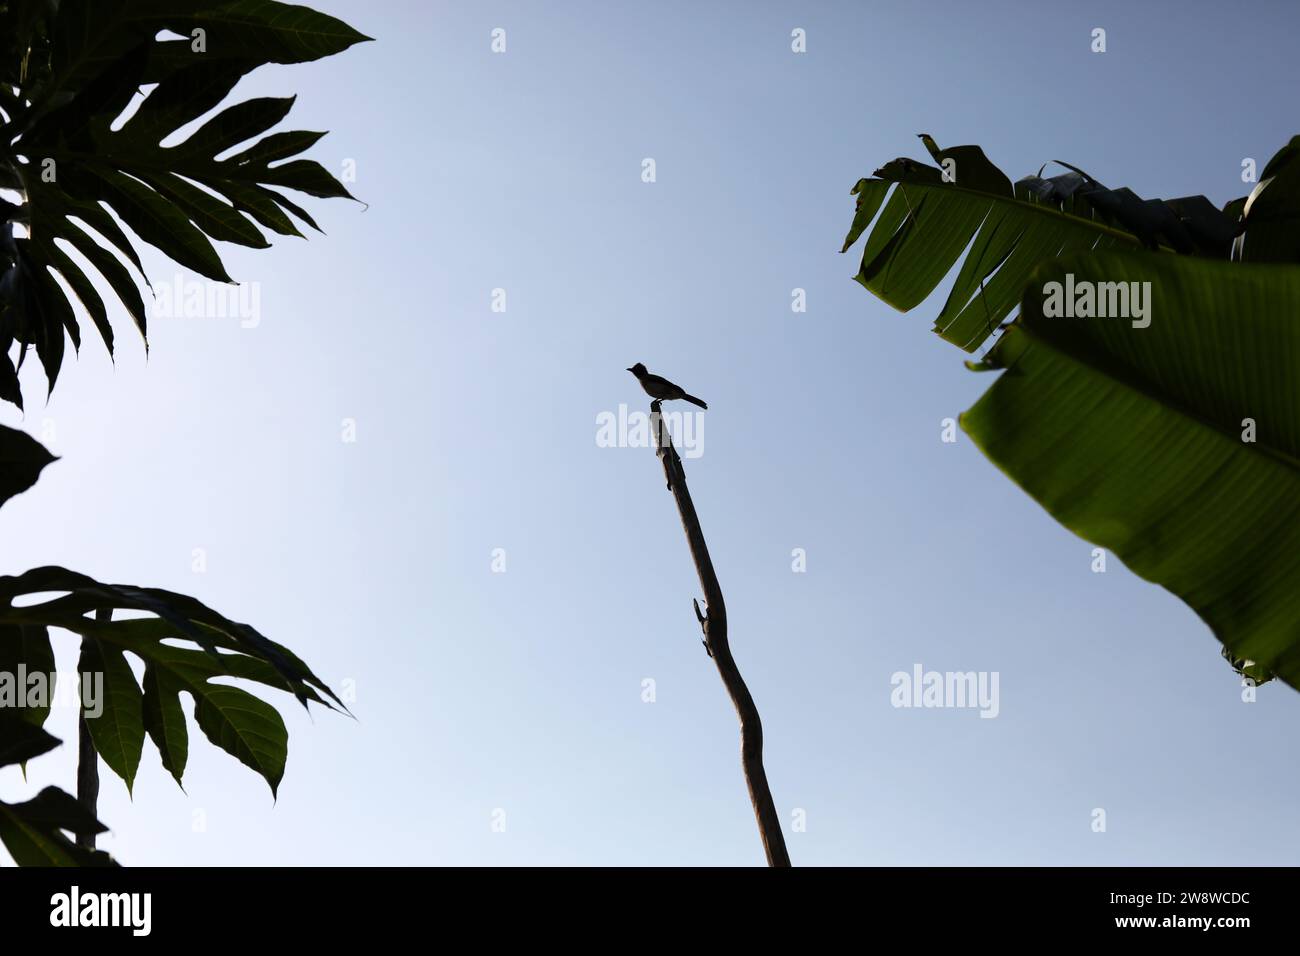 An African bird pictured on a tree with palm tree leaves in Freetown, Sierra Leone, Africa. Stock Photo